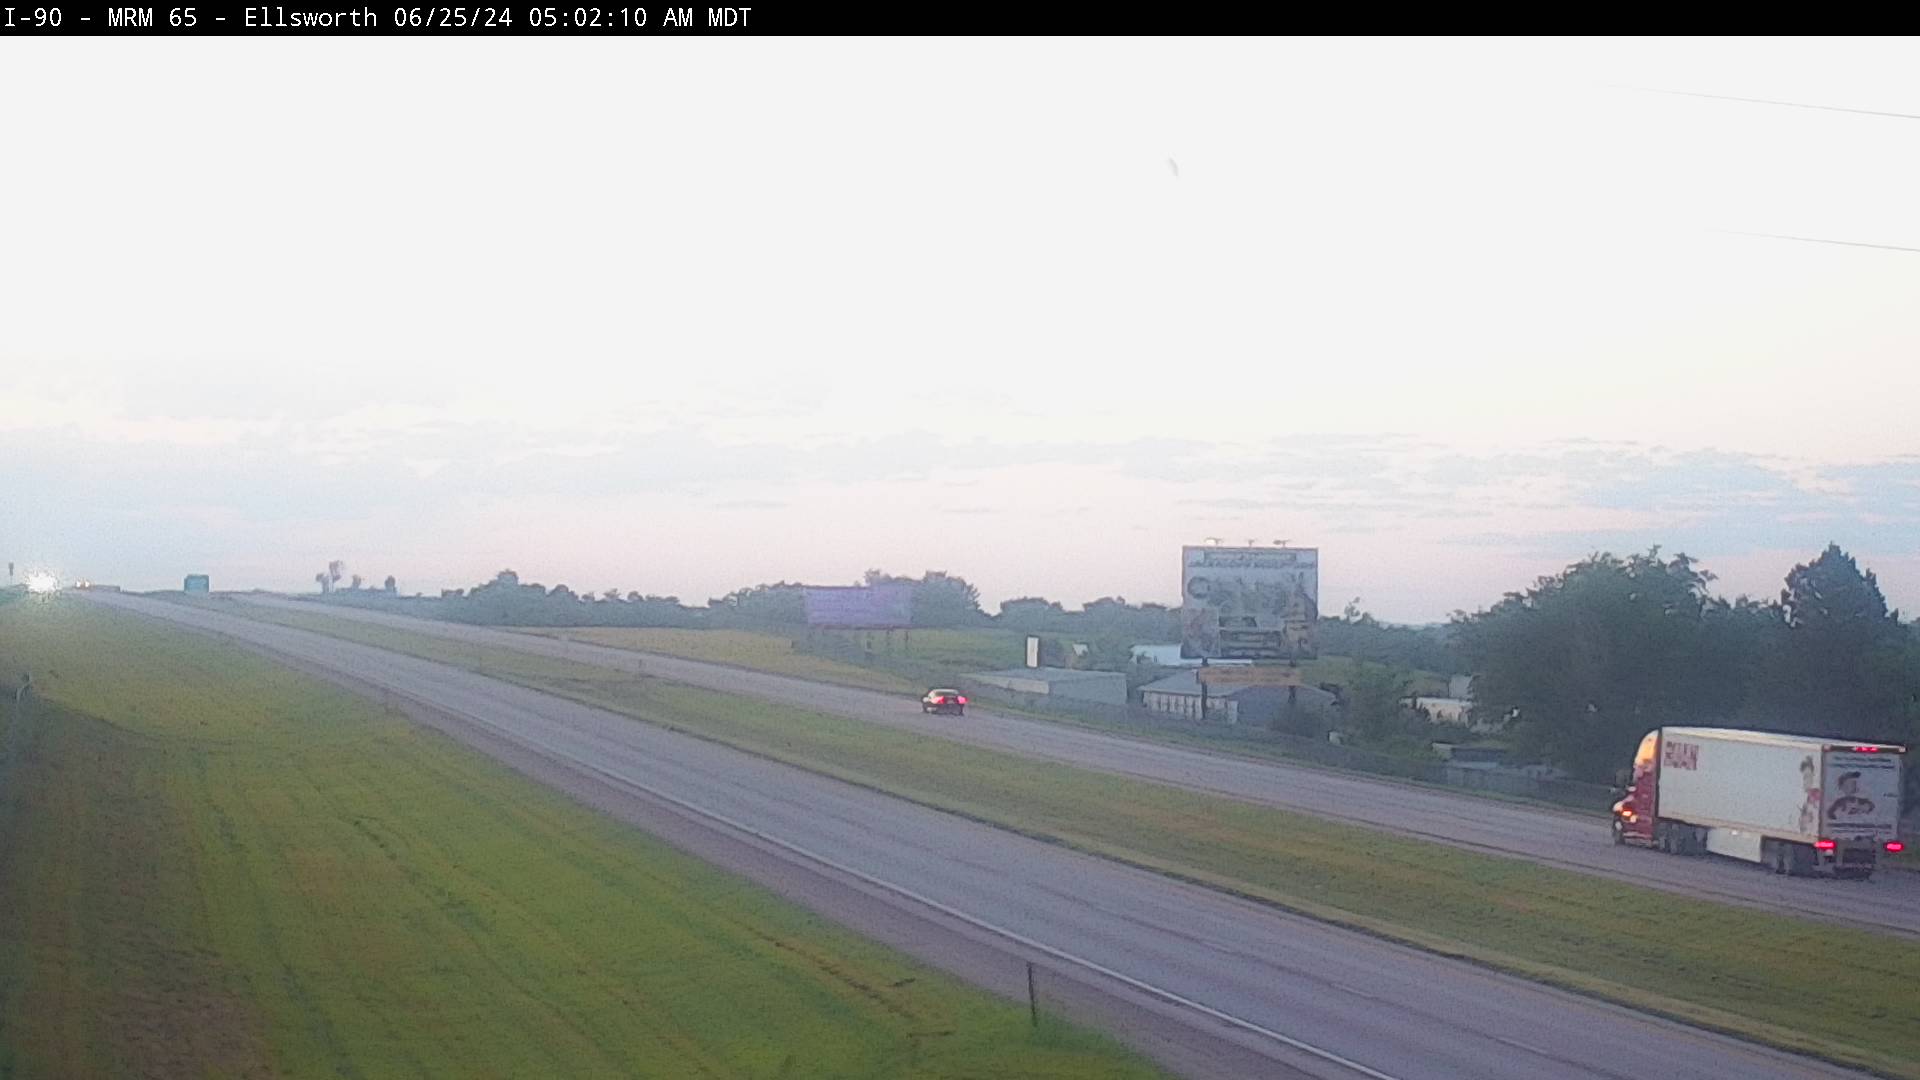 4 miles east of town along I-90 @ MP 65.2 - East Traffic Camera